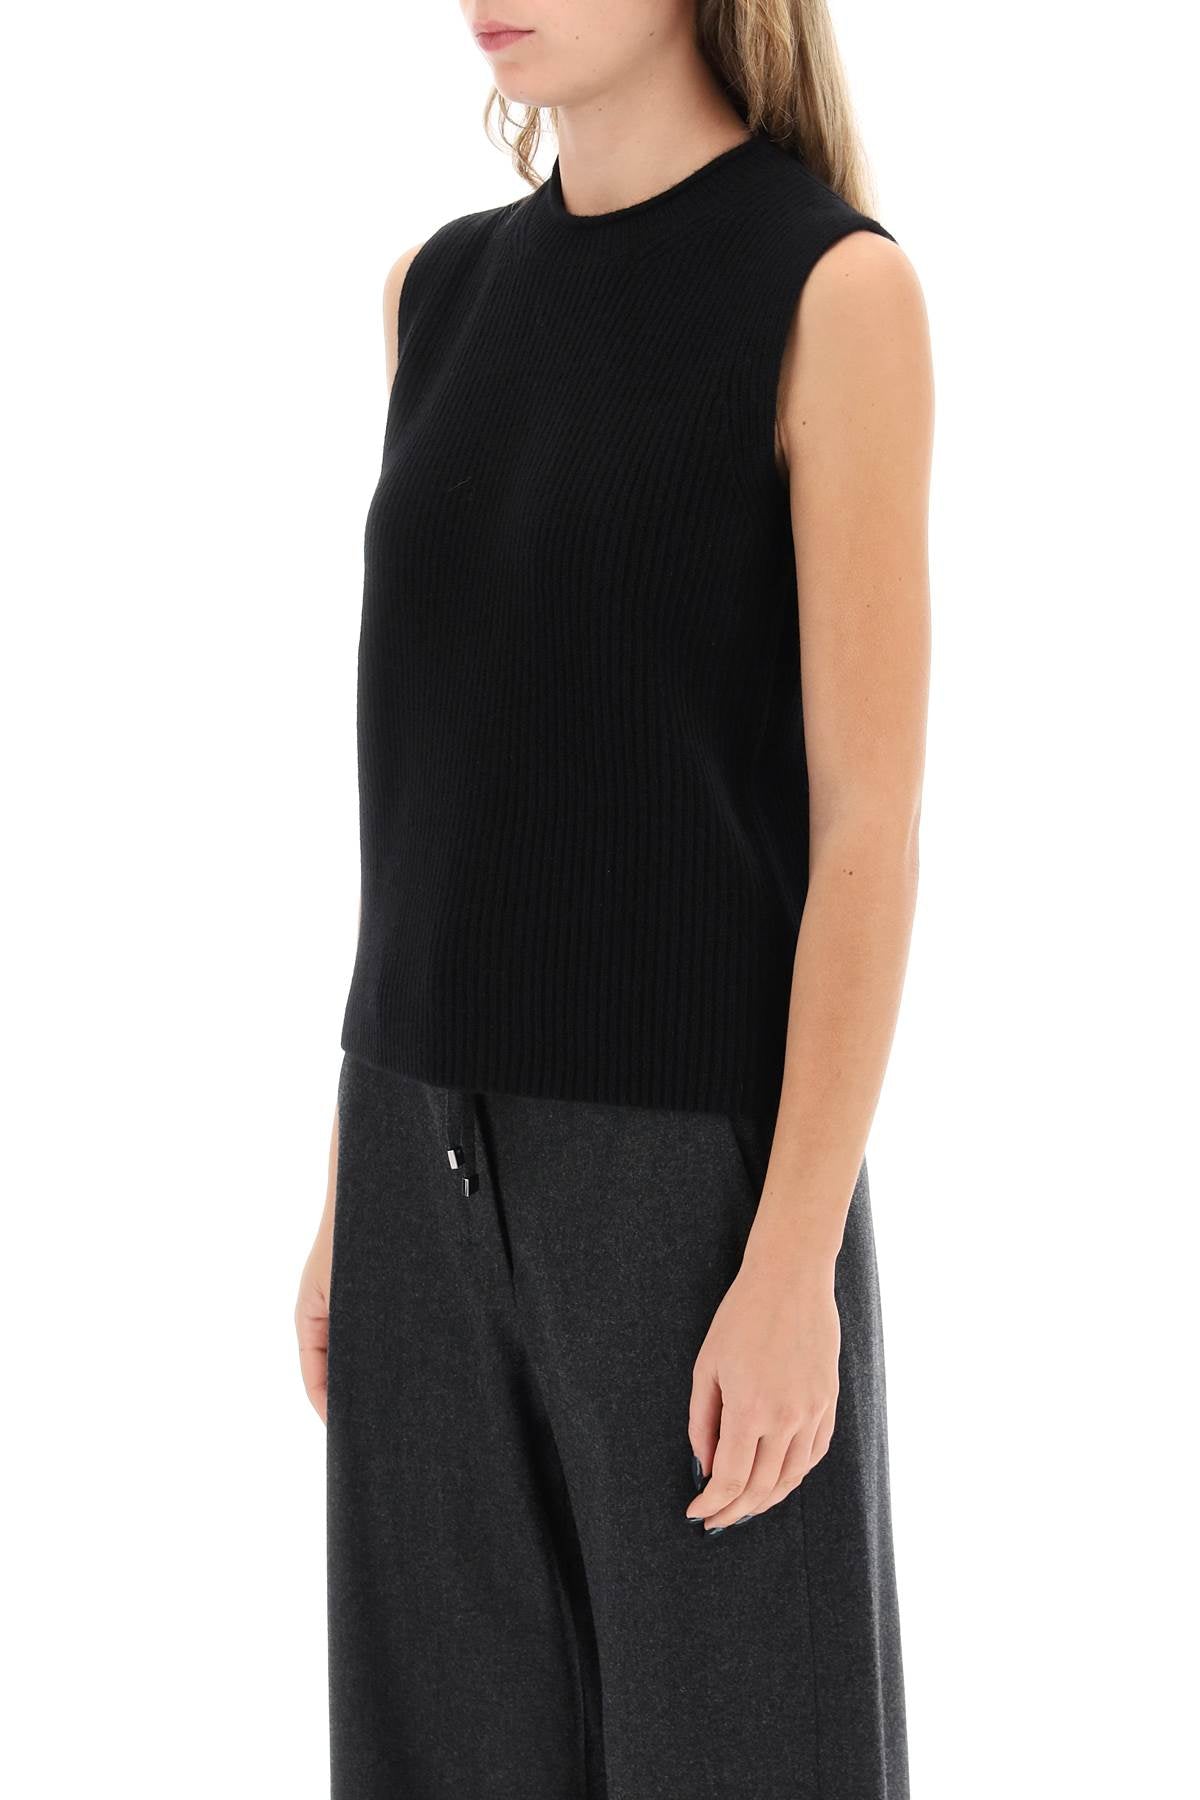 Guest in residence layer up cashmere vest-3